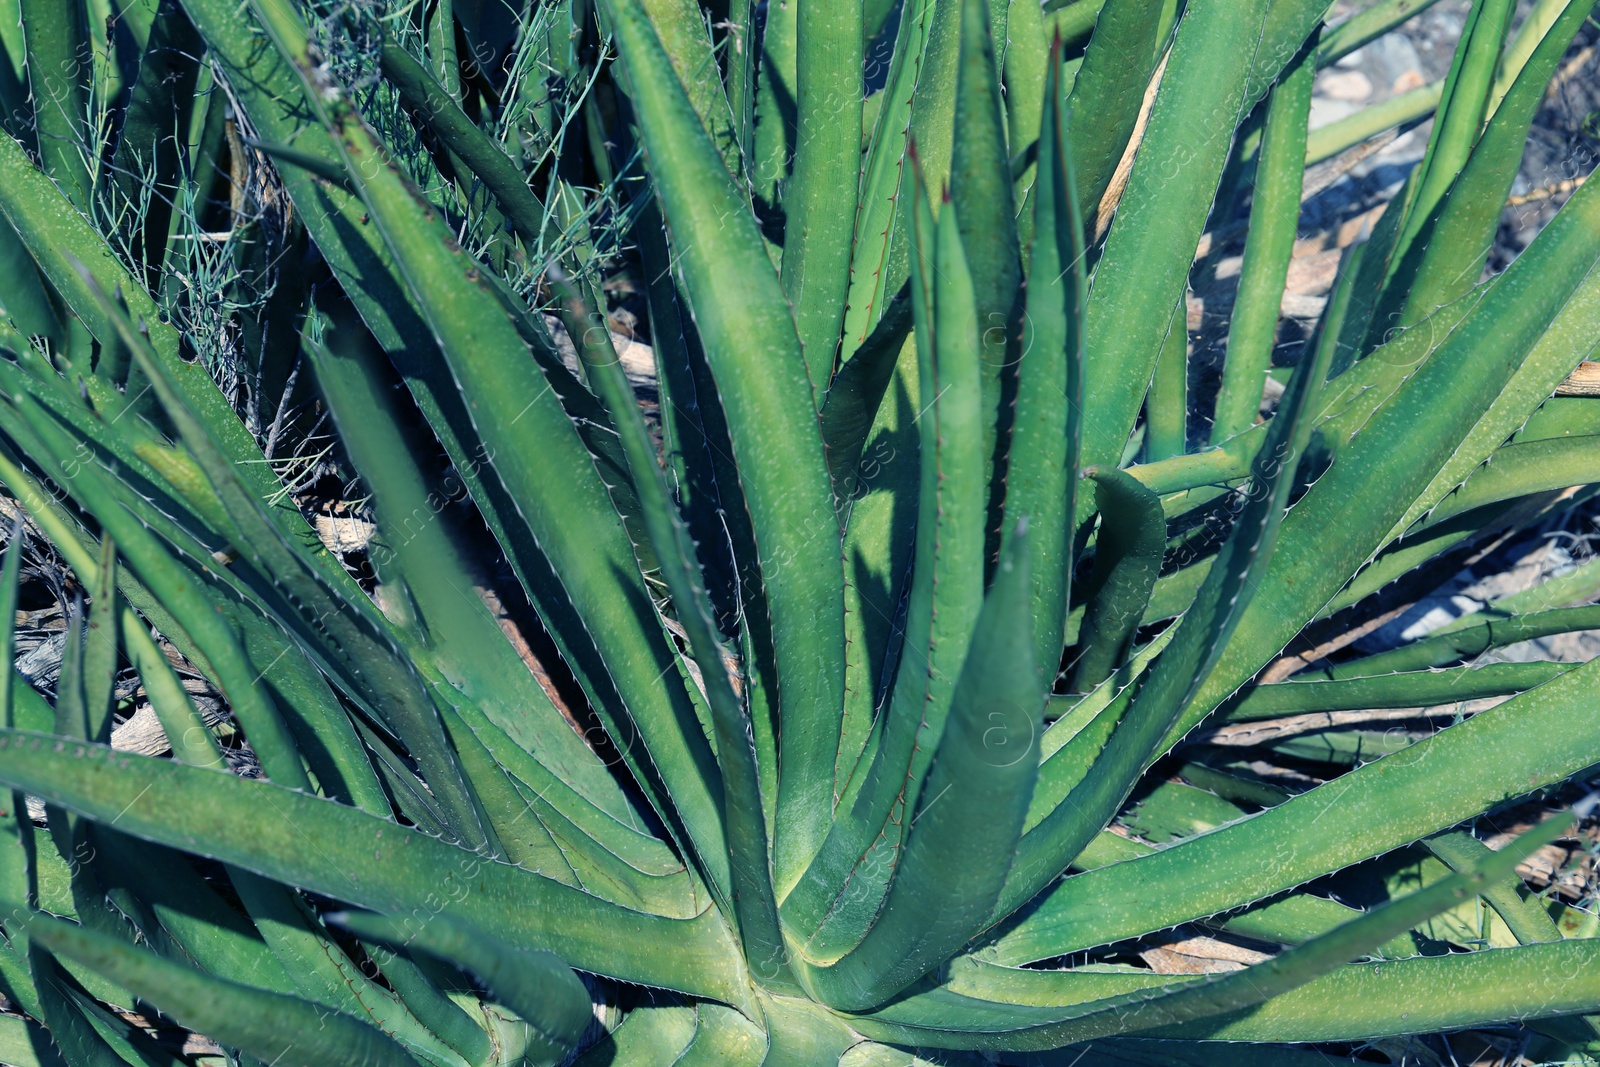 Photo of Beautiful green agave plant growing in ground outdoors, closeup